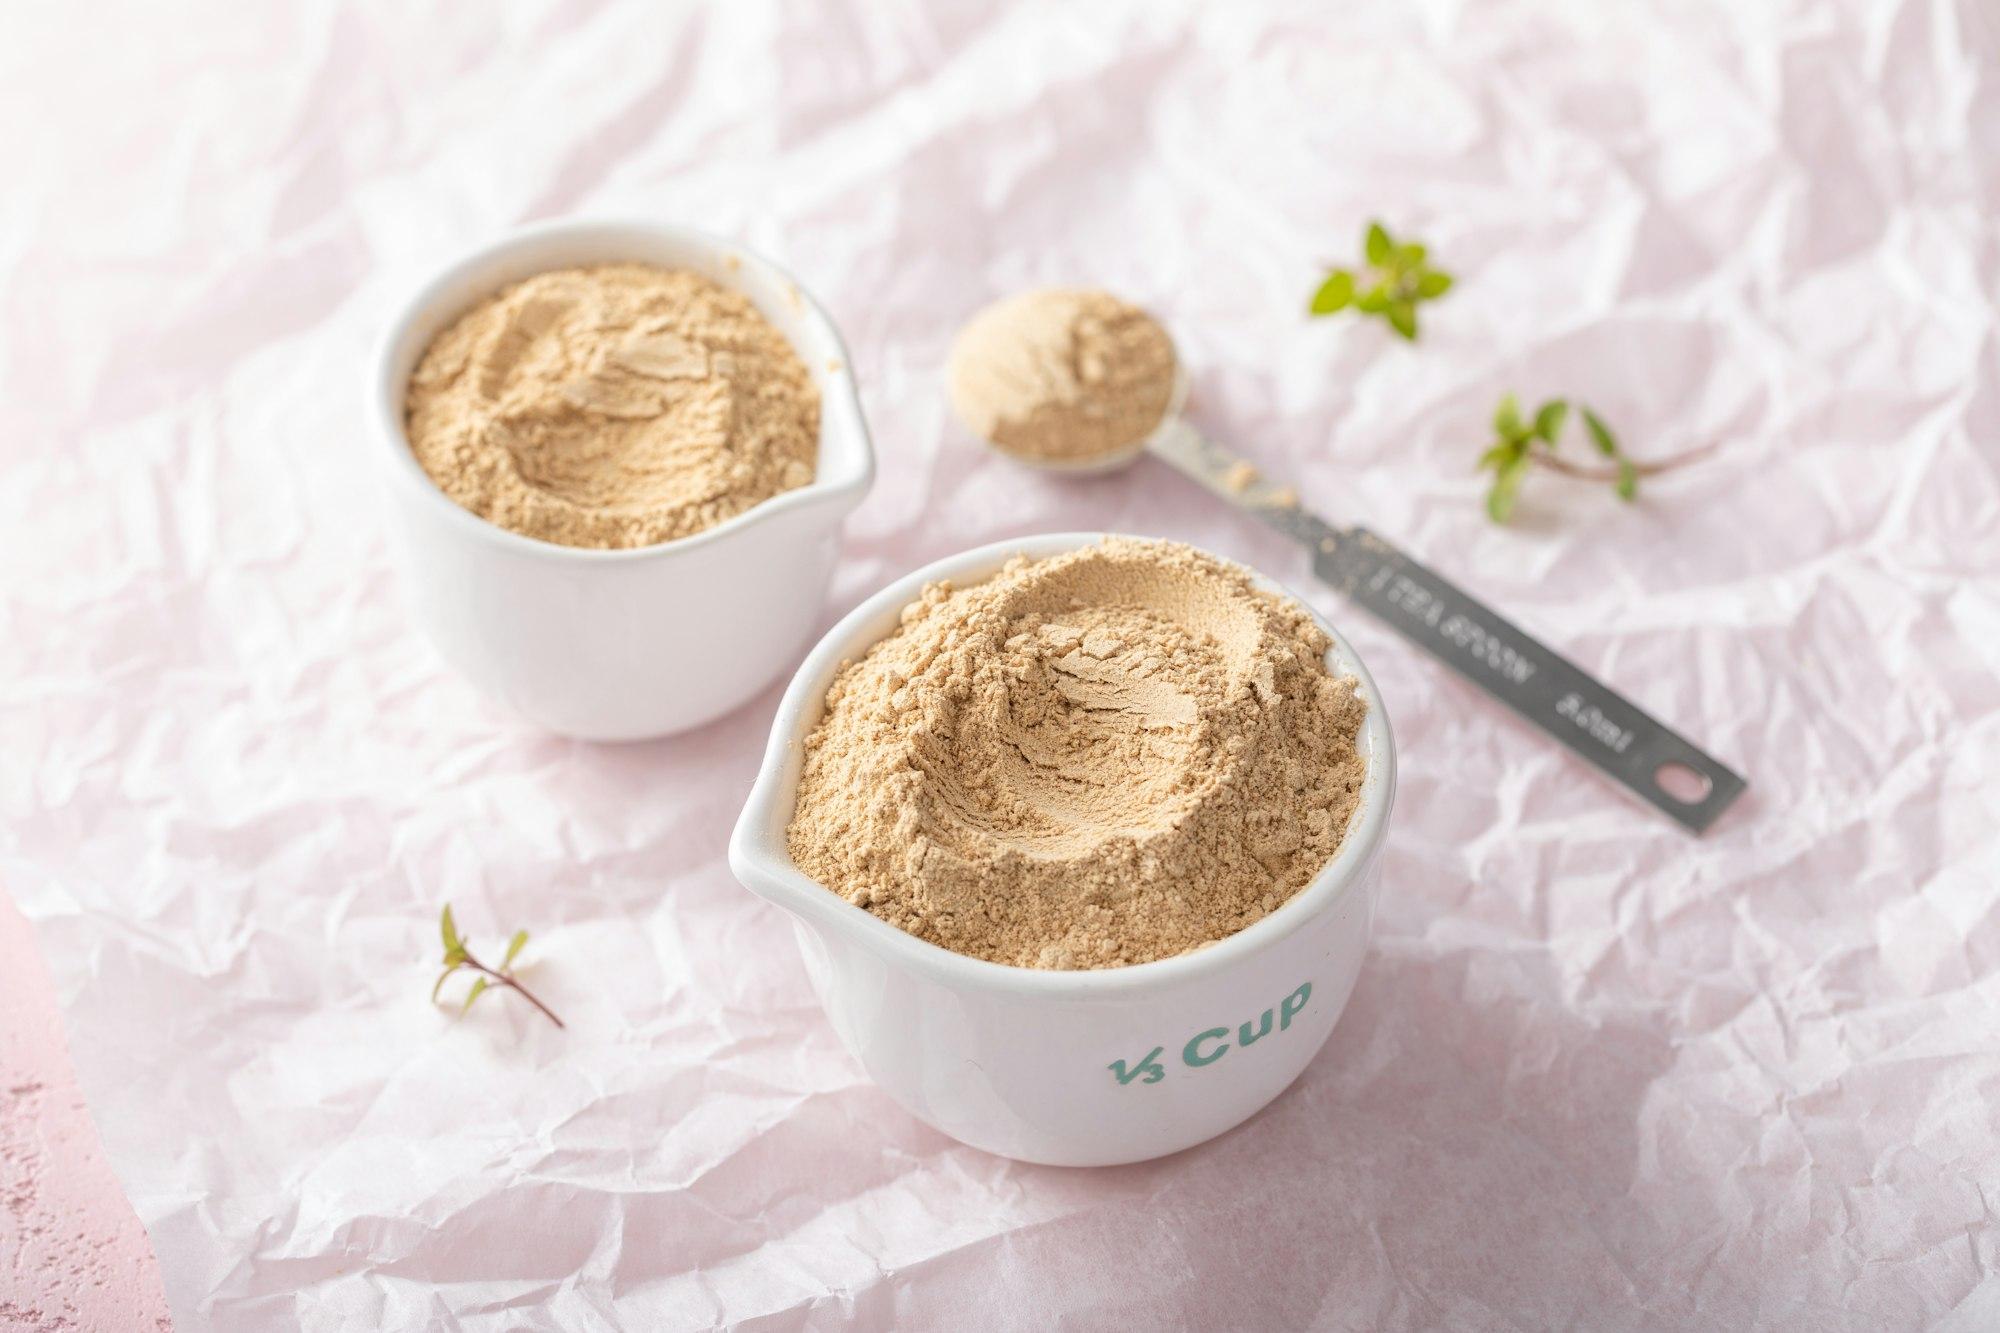 Maca powder in measuring cups and a spoon